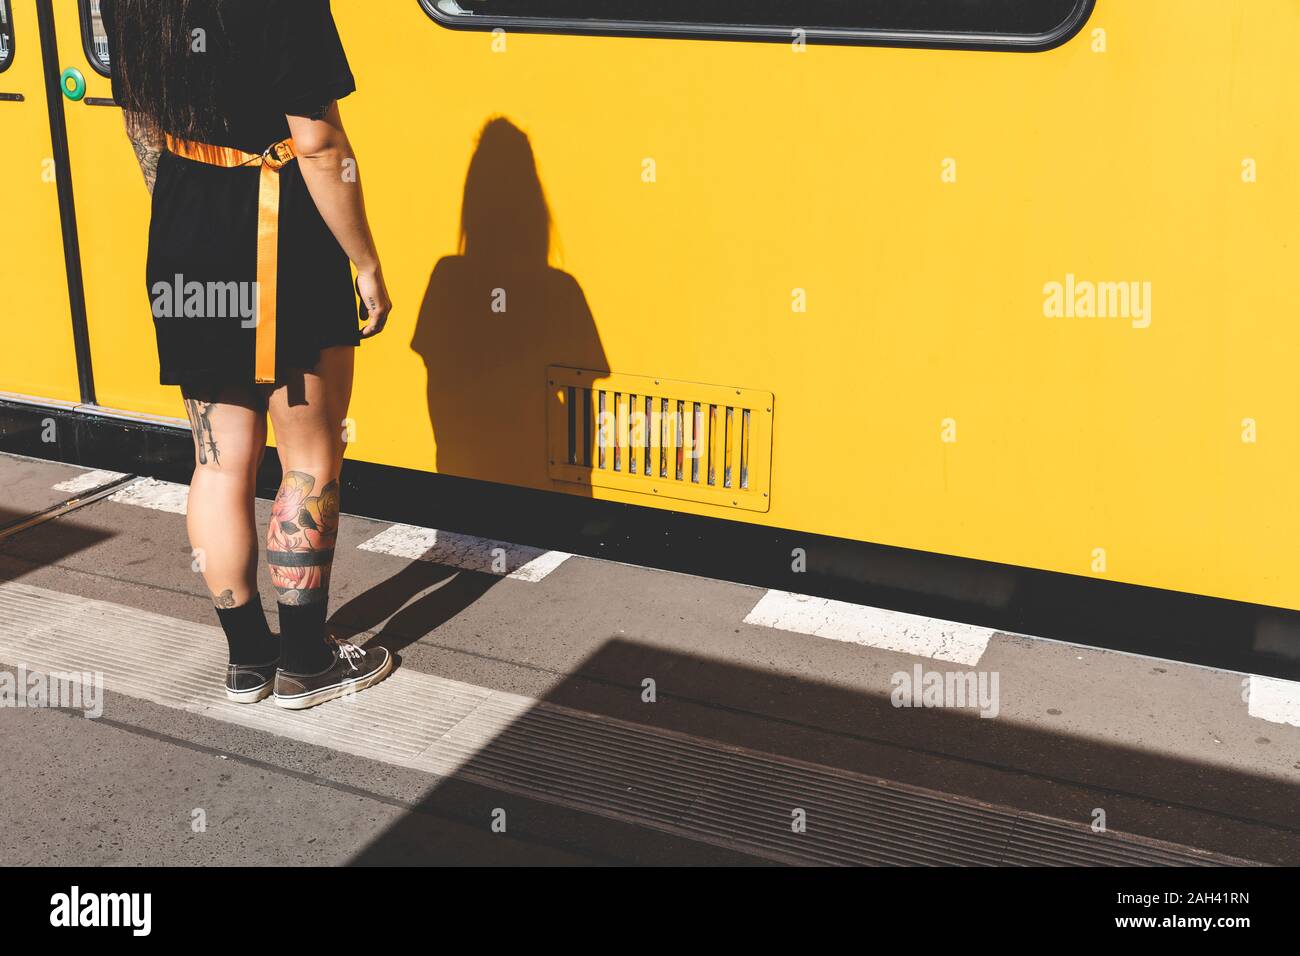 Back view and shadow of tattooed young woman standing at platform, Berlin, Germany Stock Photo